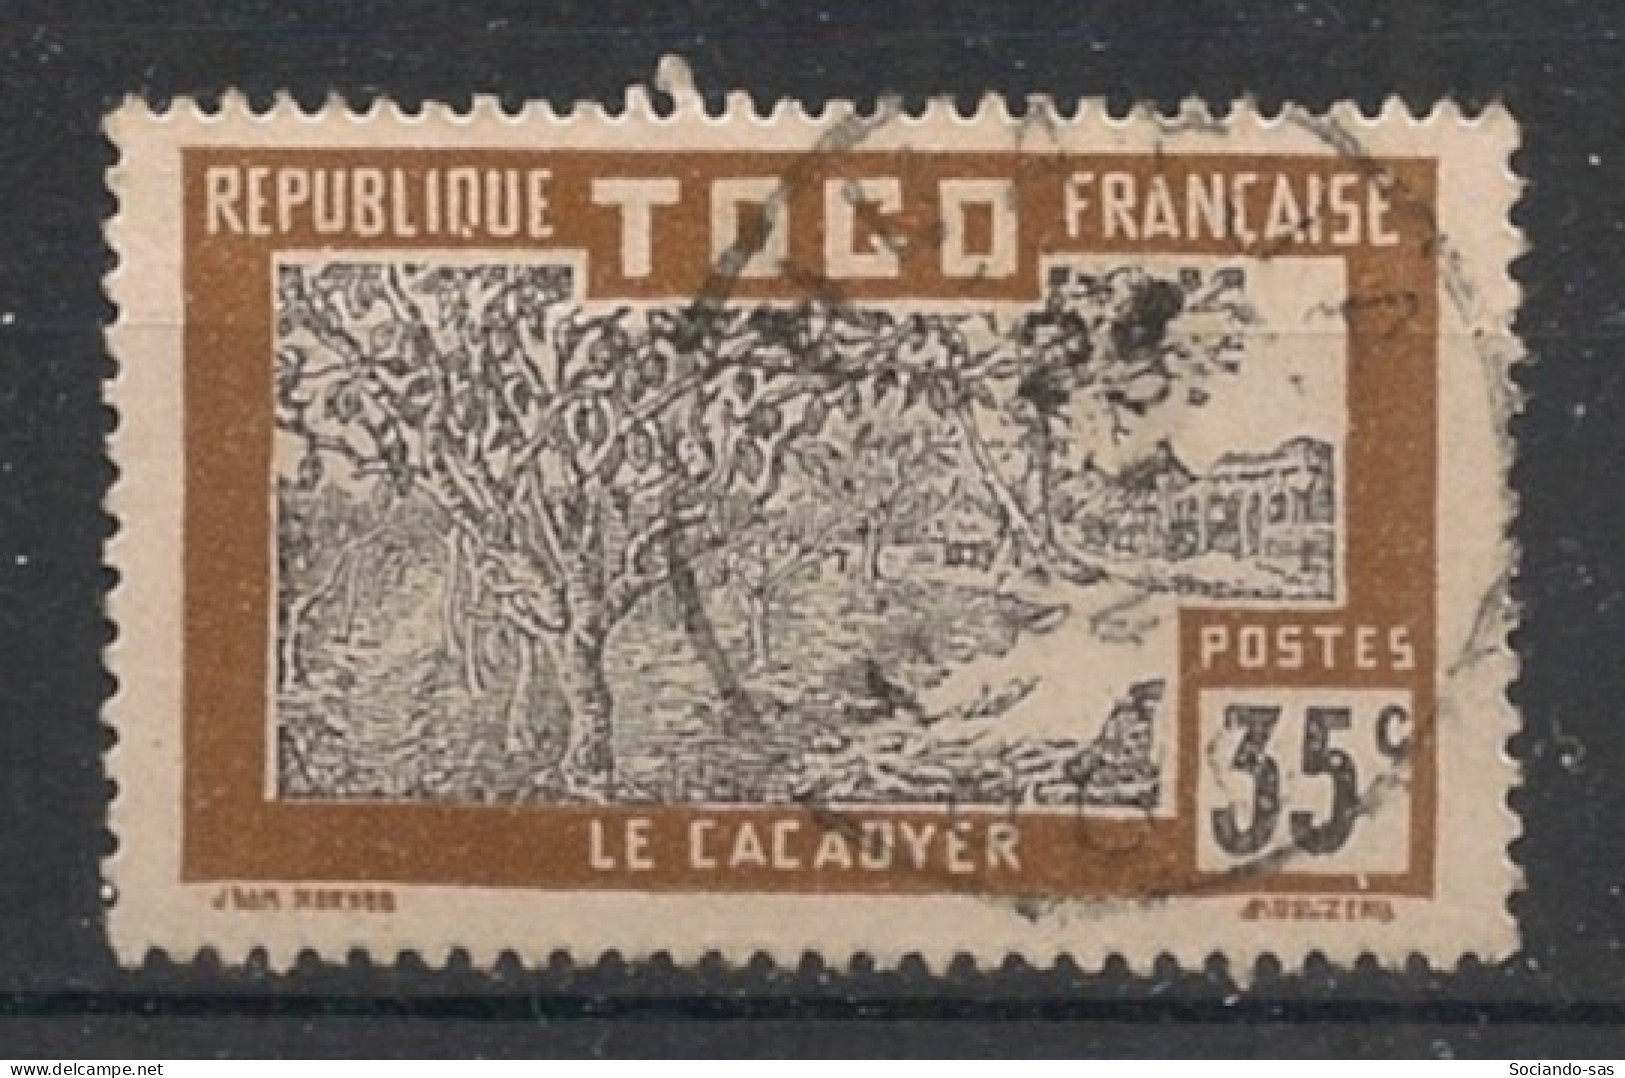 TOGO - 1924 - N°YT. 133 - Cacaoyer 35c Brun - Oblitéré / Used - Used Stamps